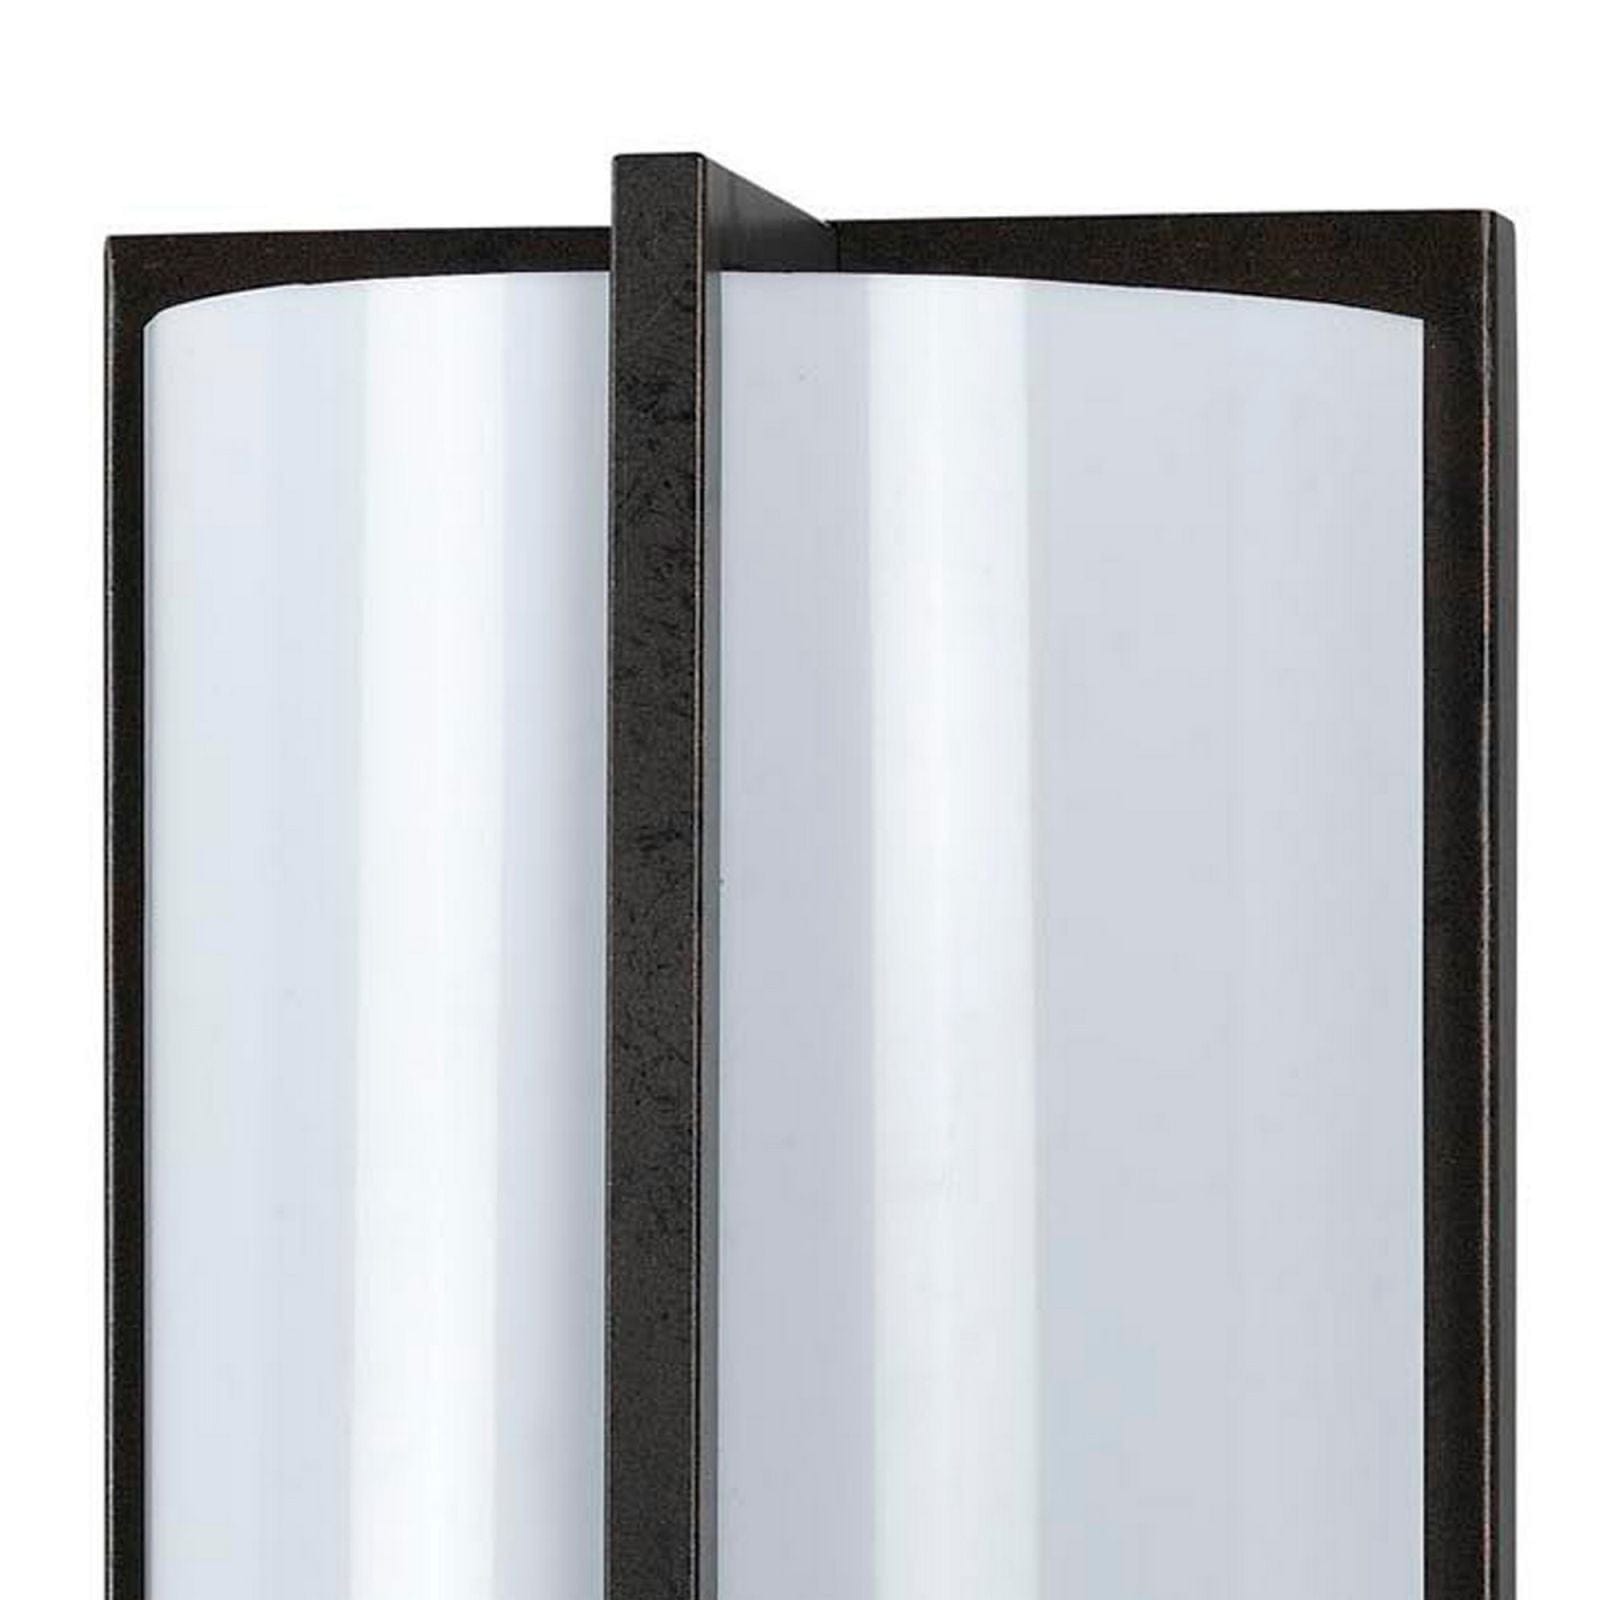 Benzara Cylindrical Shaped Plc Wall Lamp With 3D Design, Set Of 4, Black And White By Benzara Wall Lamps BM220708